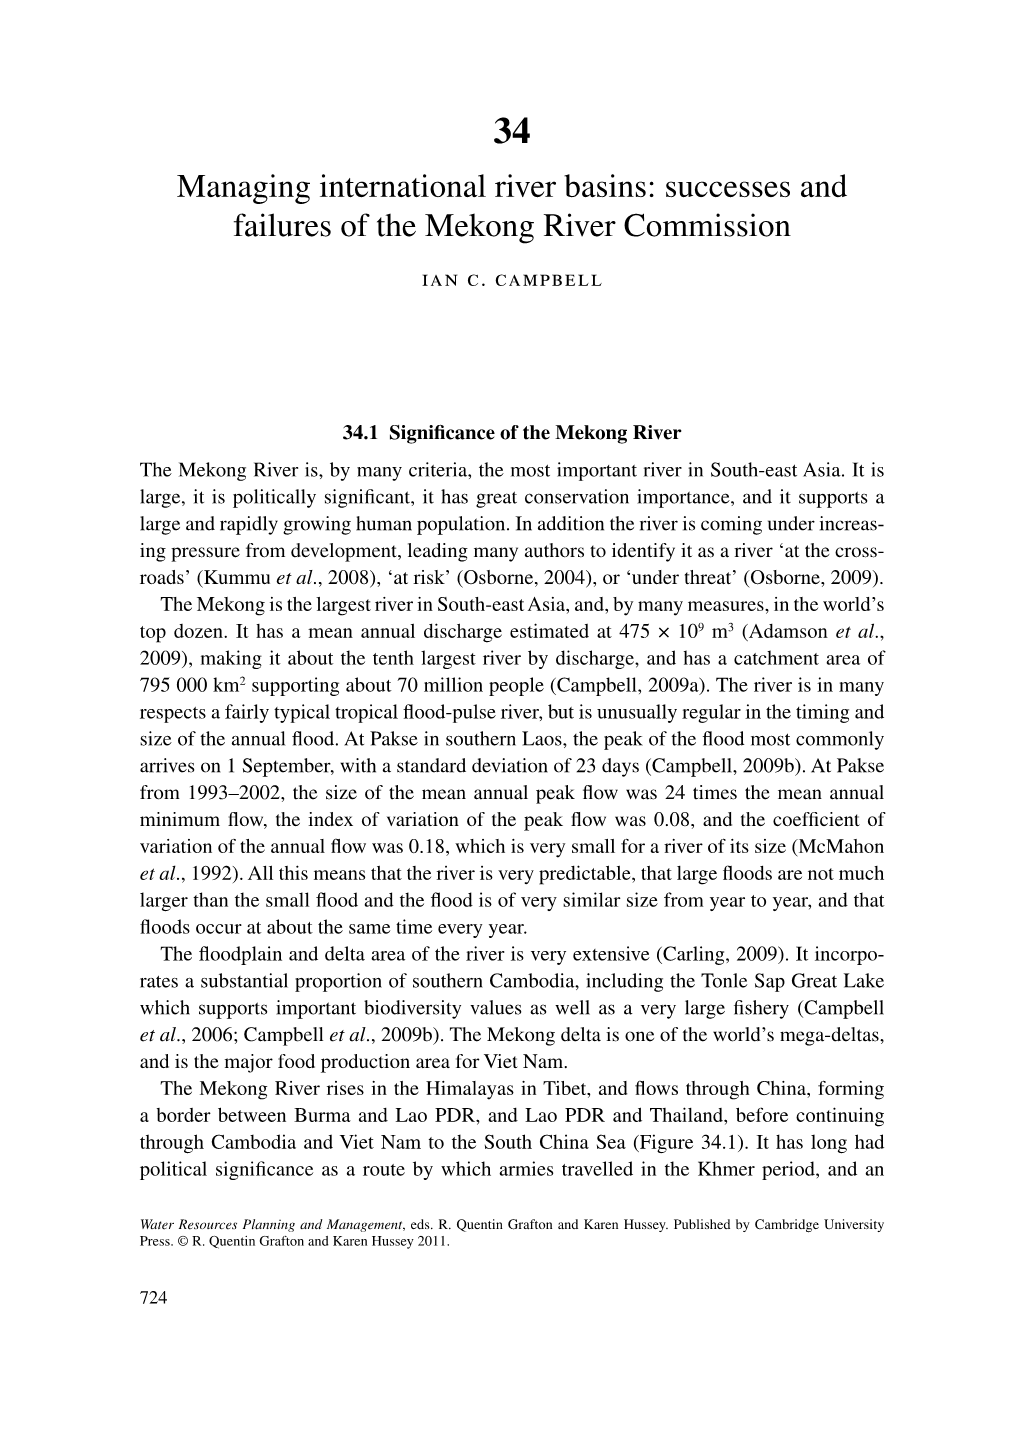 Successes and Failures of the Mekong River Commission